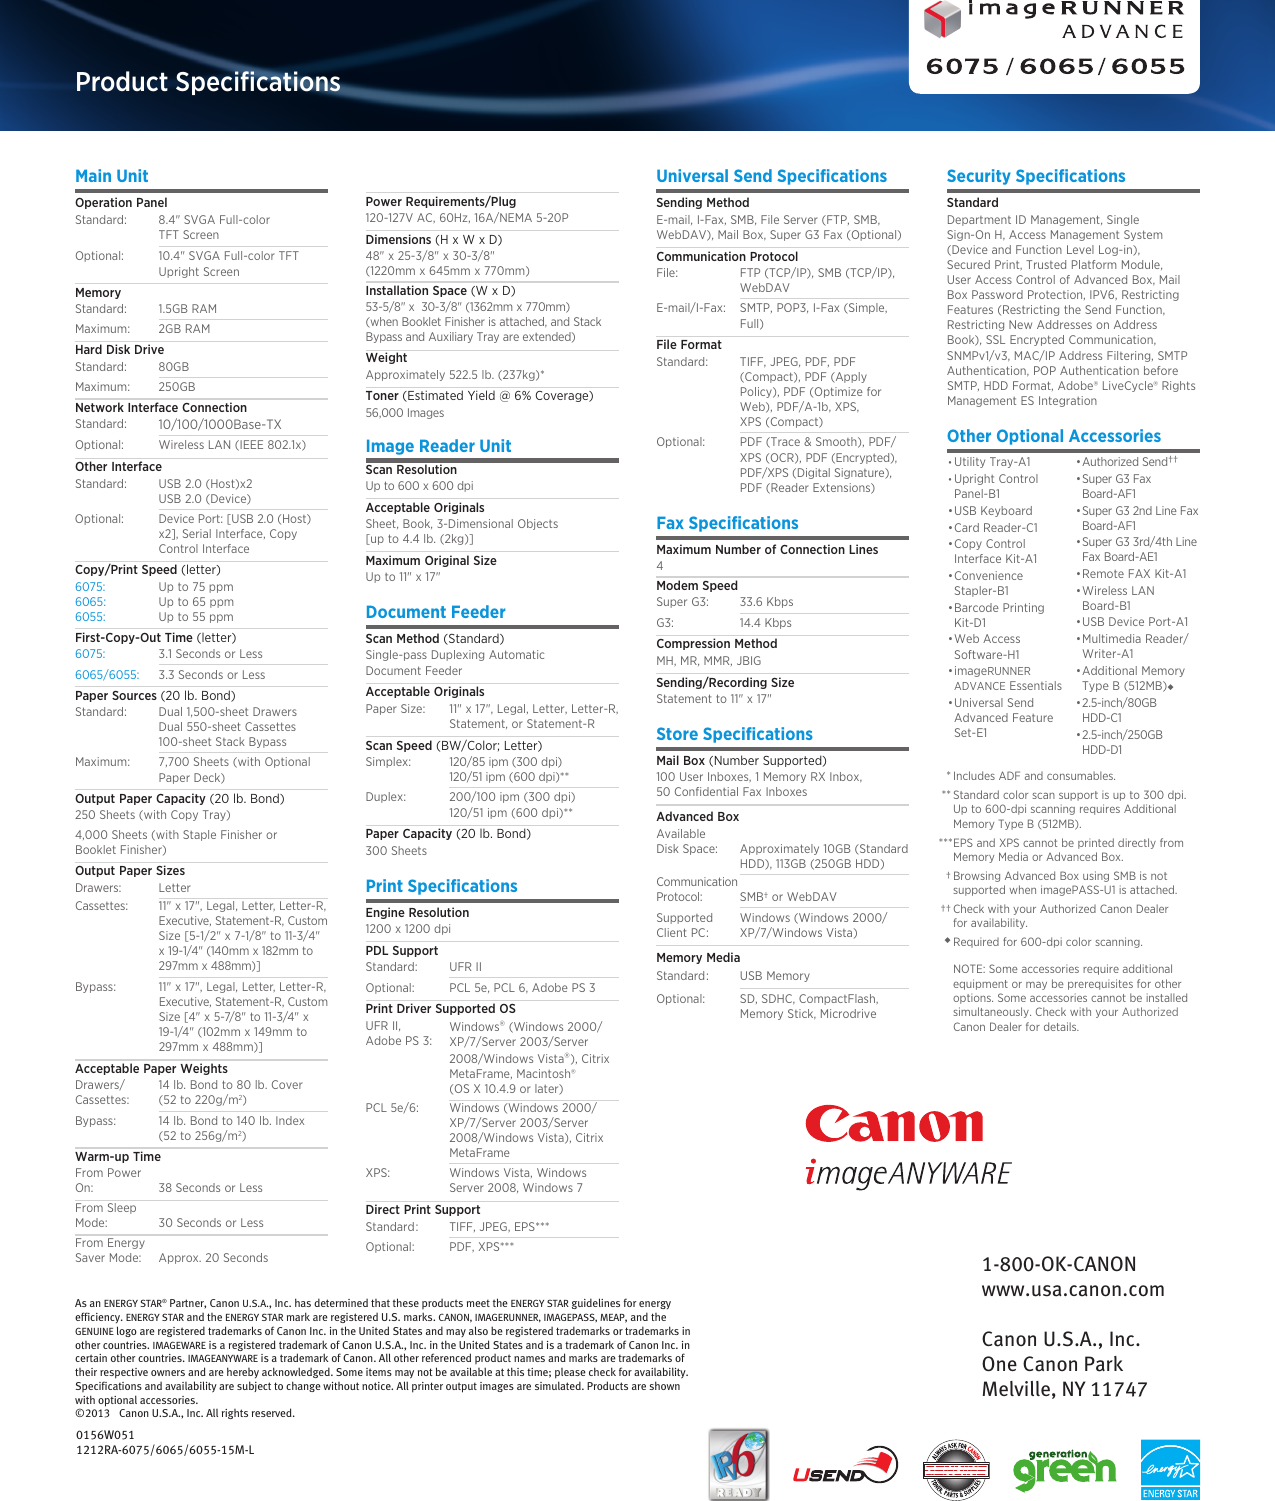 Page 12 of 12 - Canon Canon-Imagerunner-Advance-6065-Read-Only-Brochure- ImageRUNNER ADVANCE 6075/6065/6055  Canon-imagerunner-advance-6065-read-only-brochure